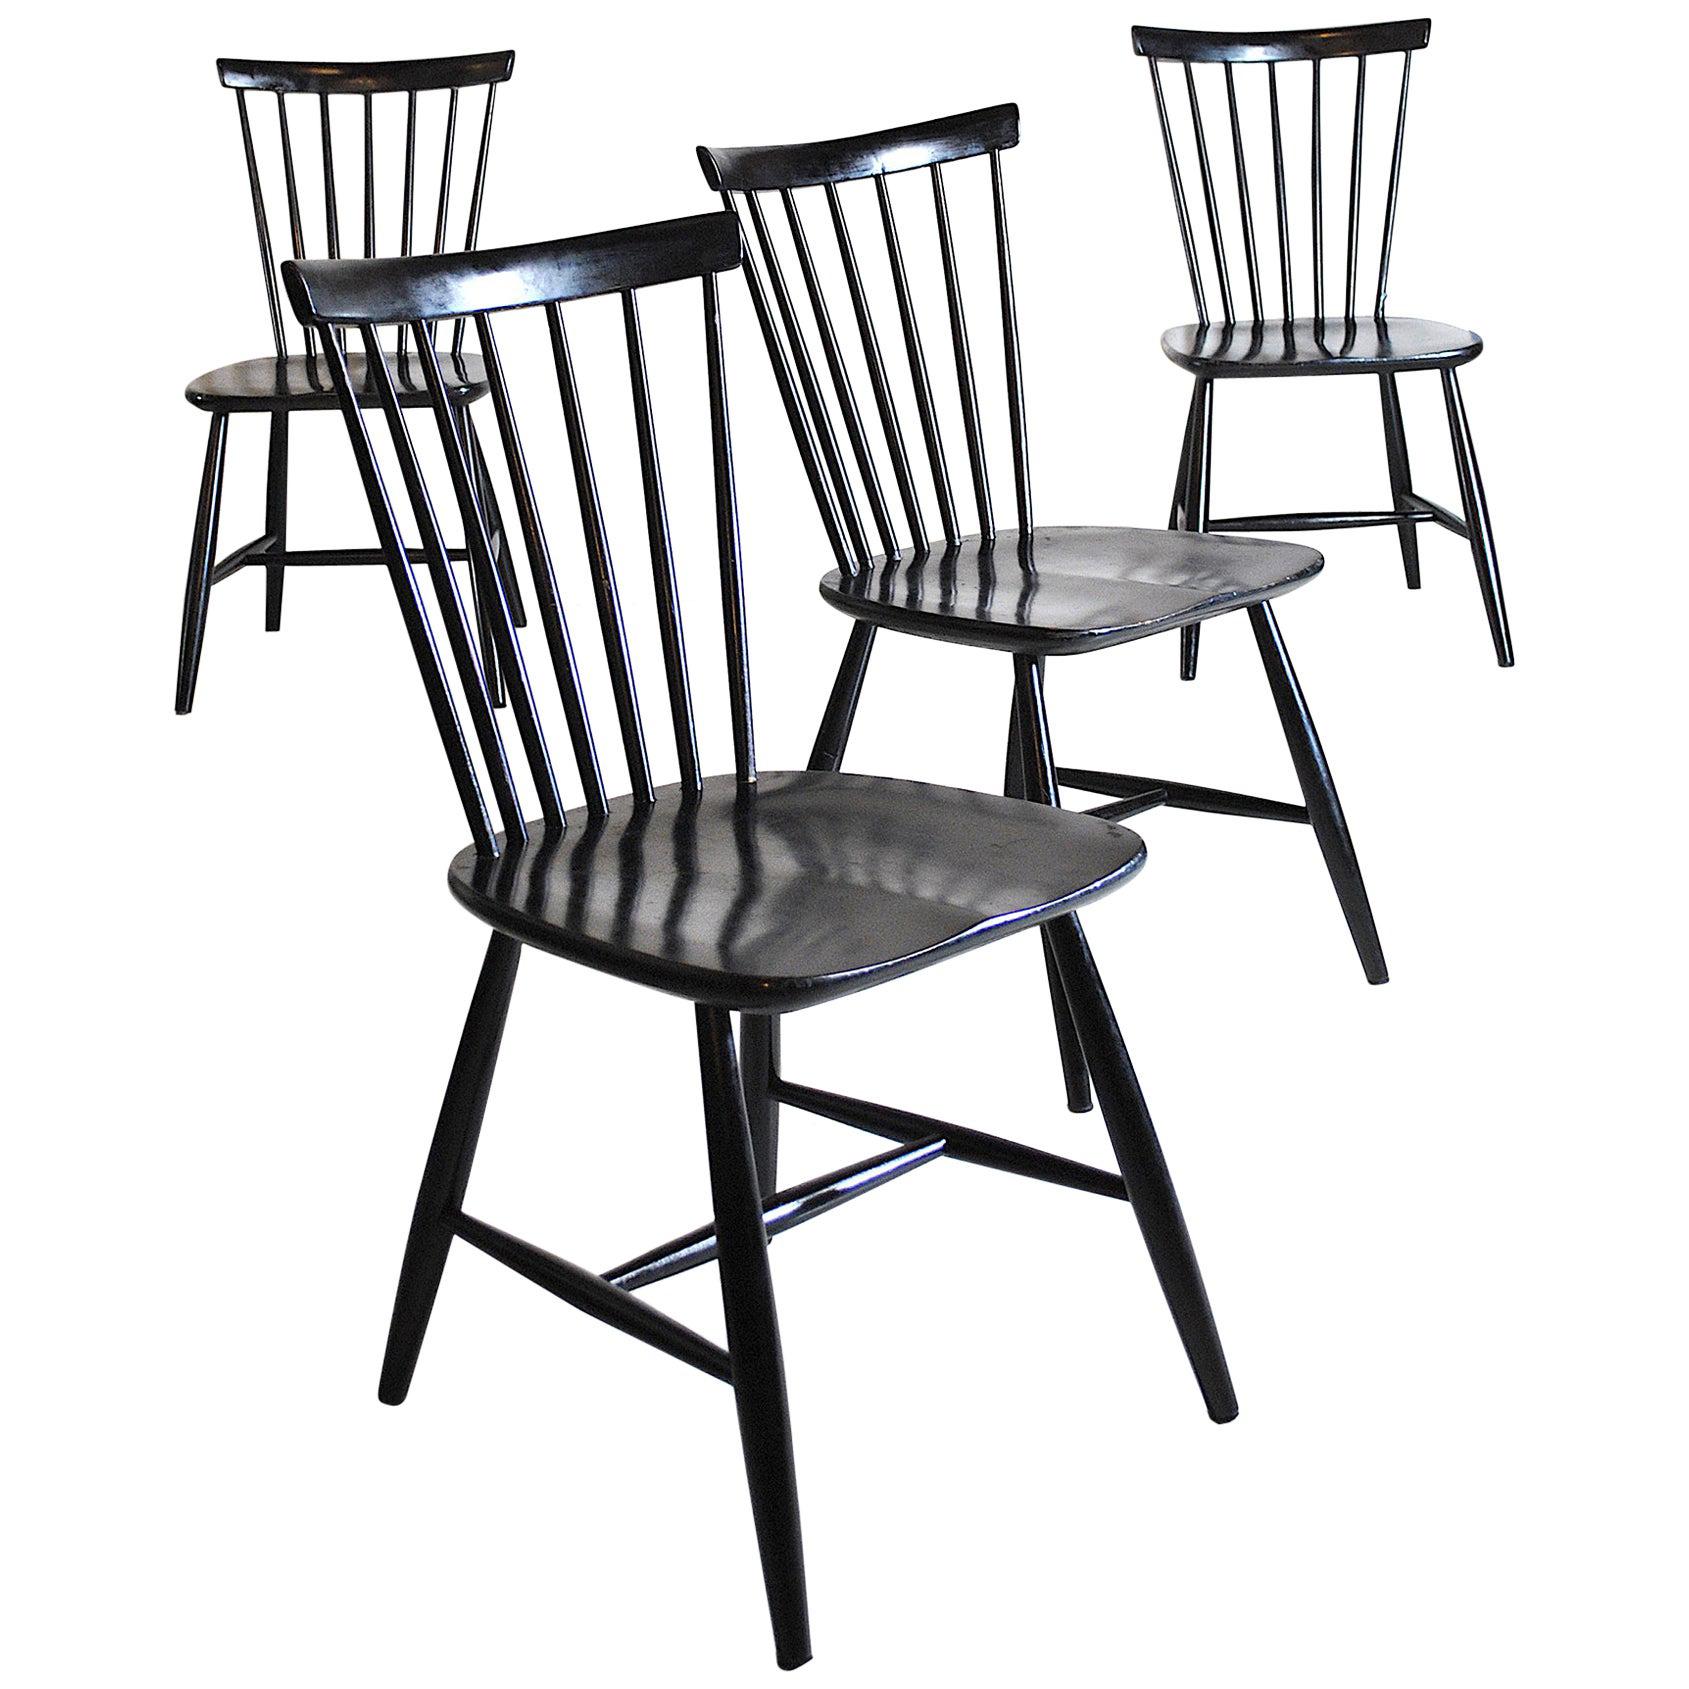 Haga Fors Chairs Scandinavian Style For Sale